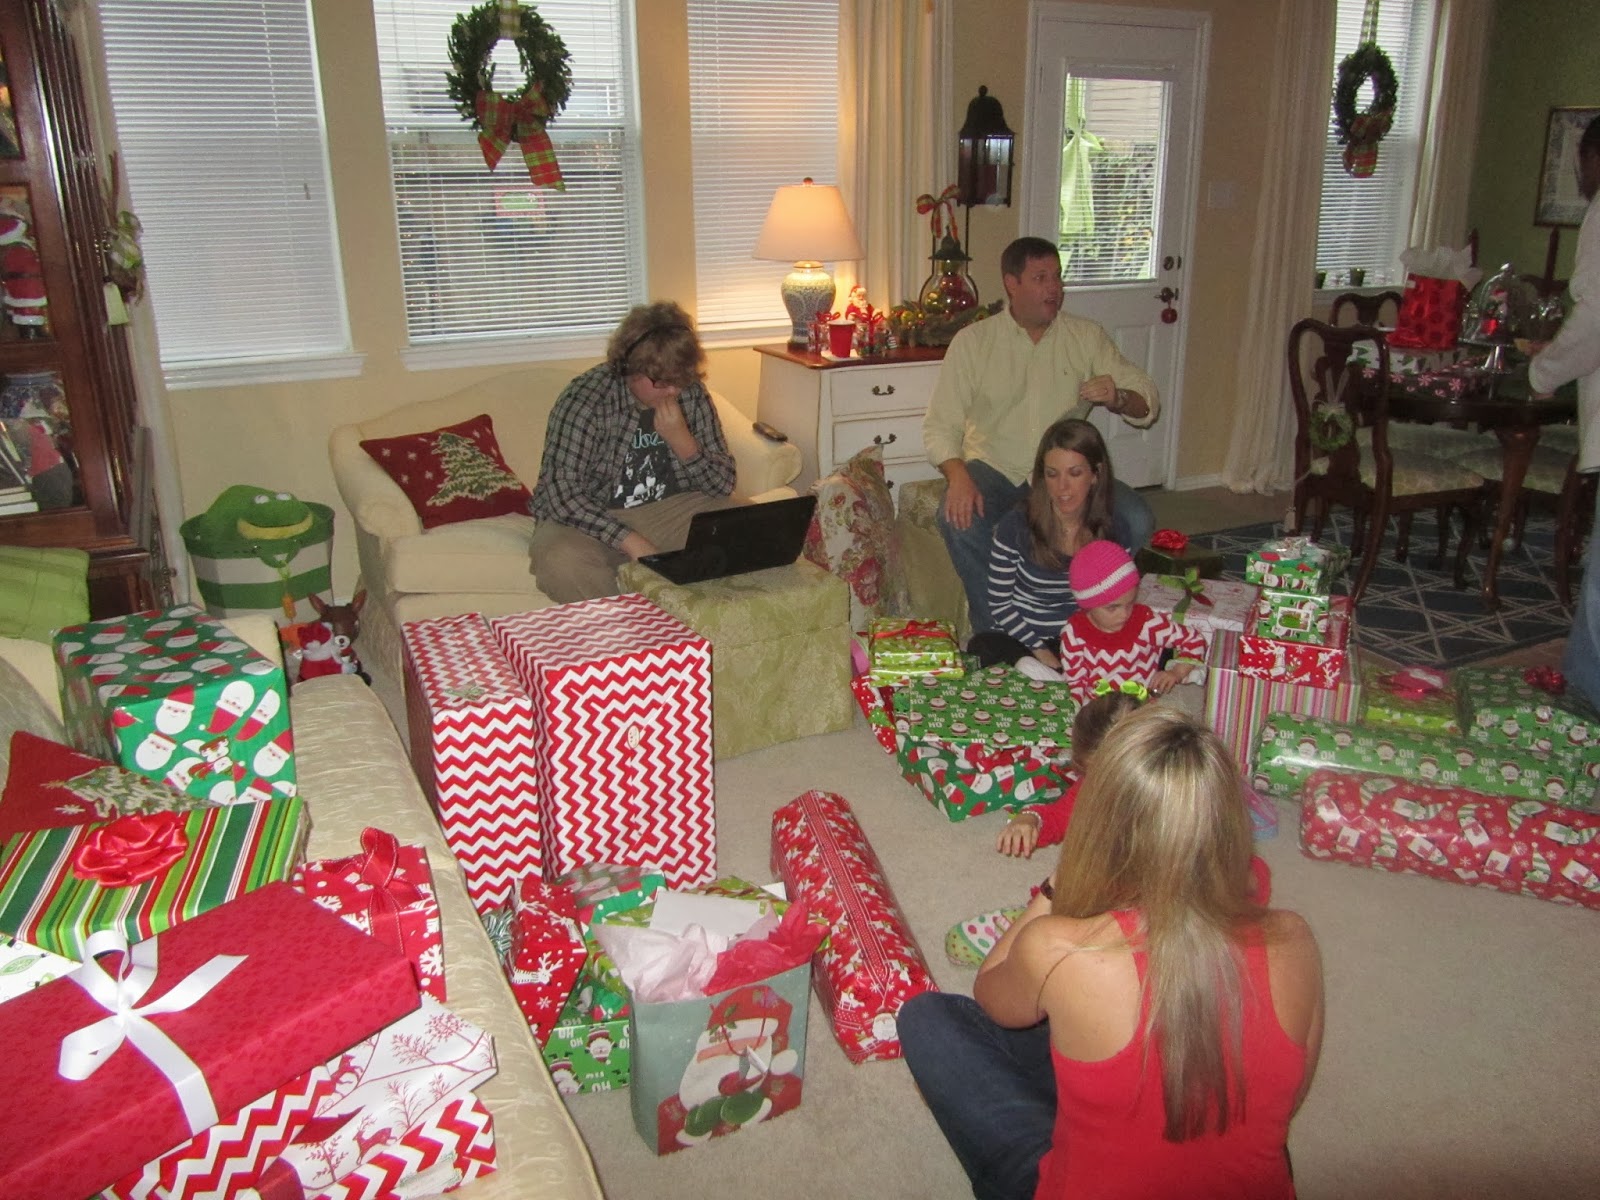 CatCardsBabies: Christmas Evening at Mimaws House